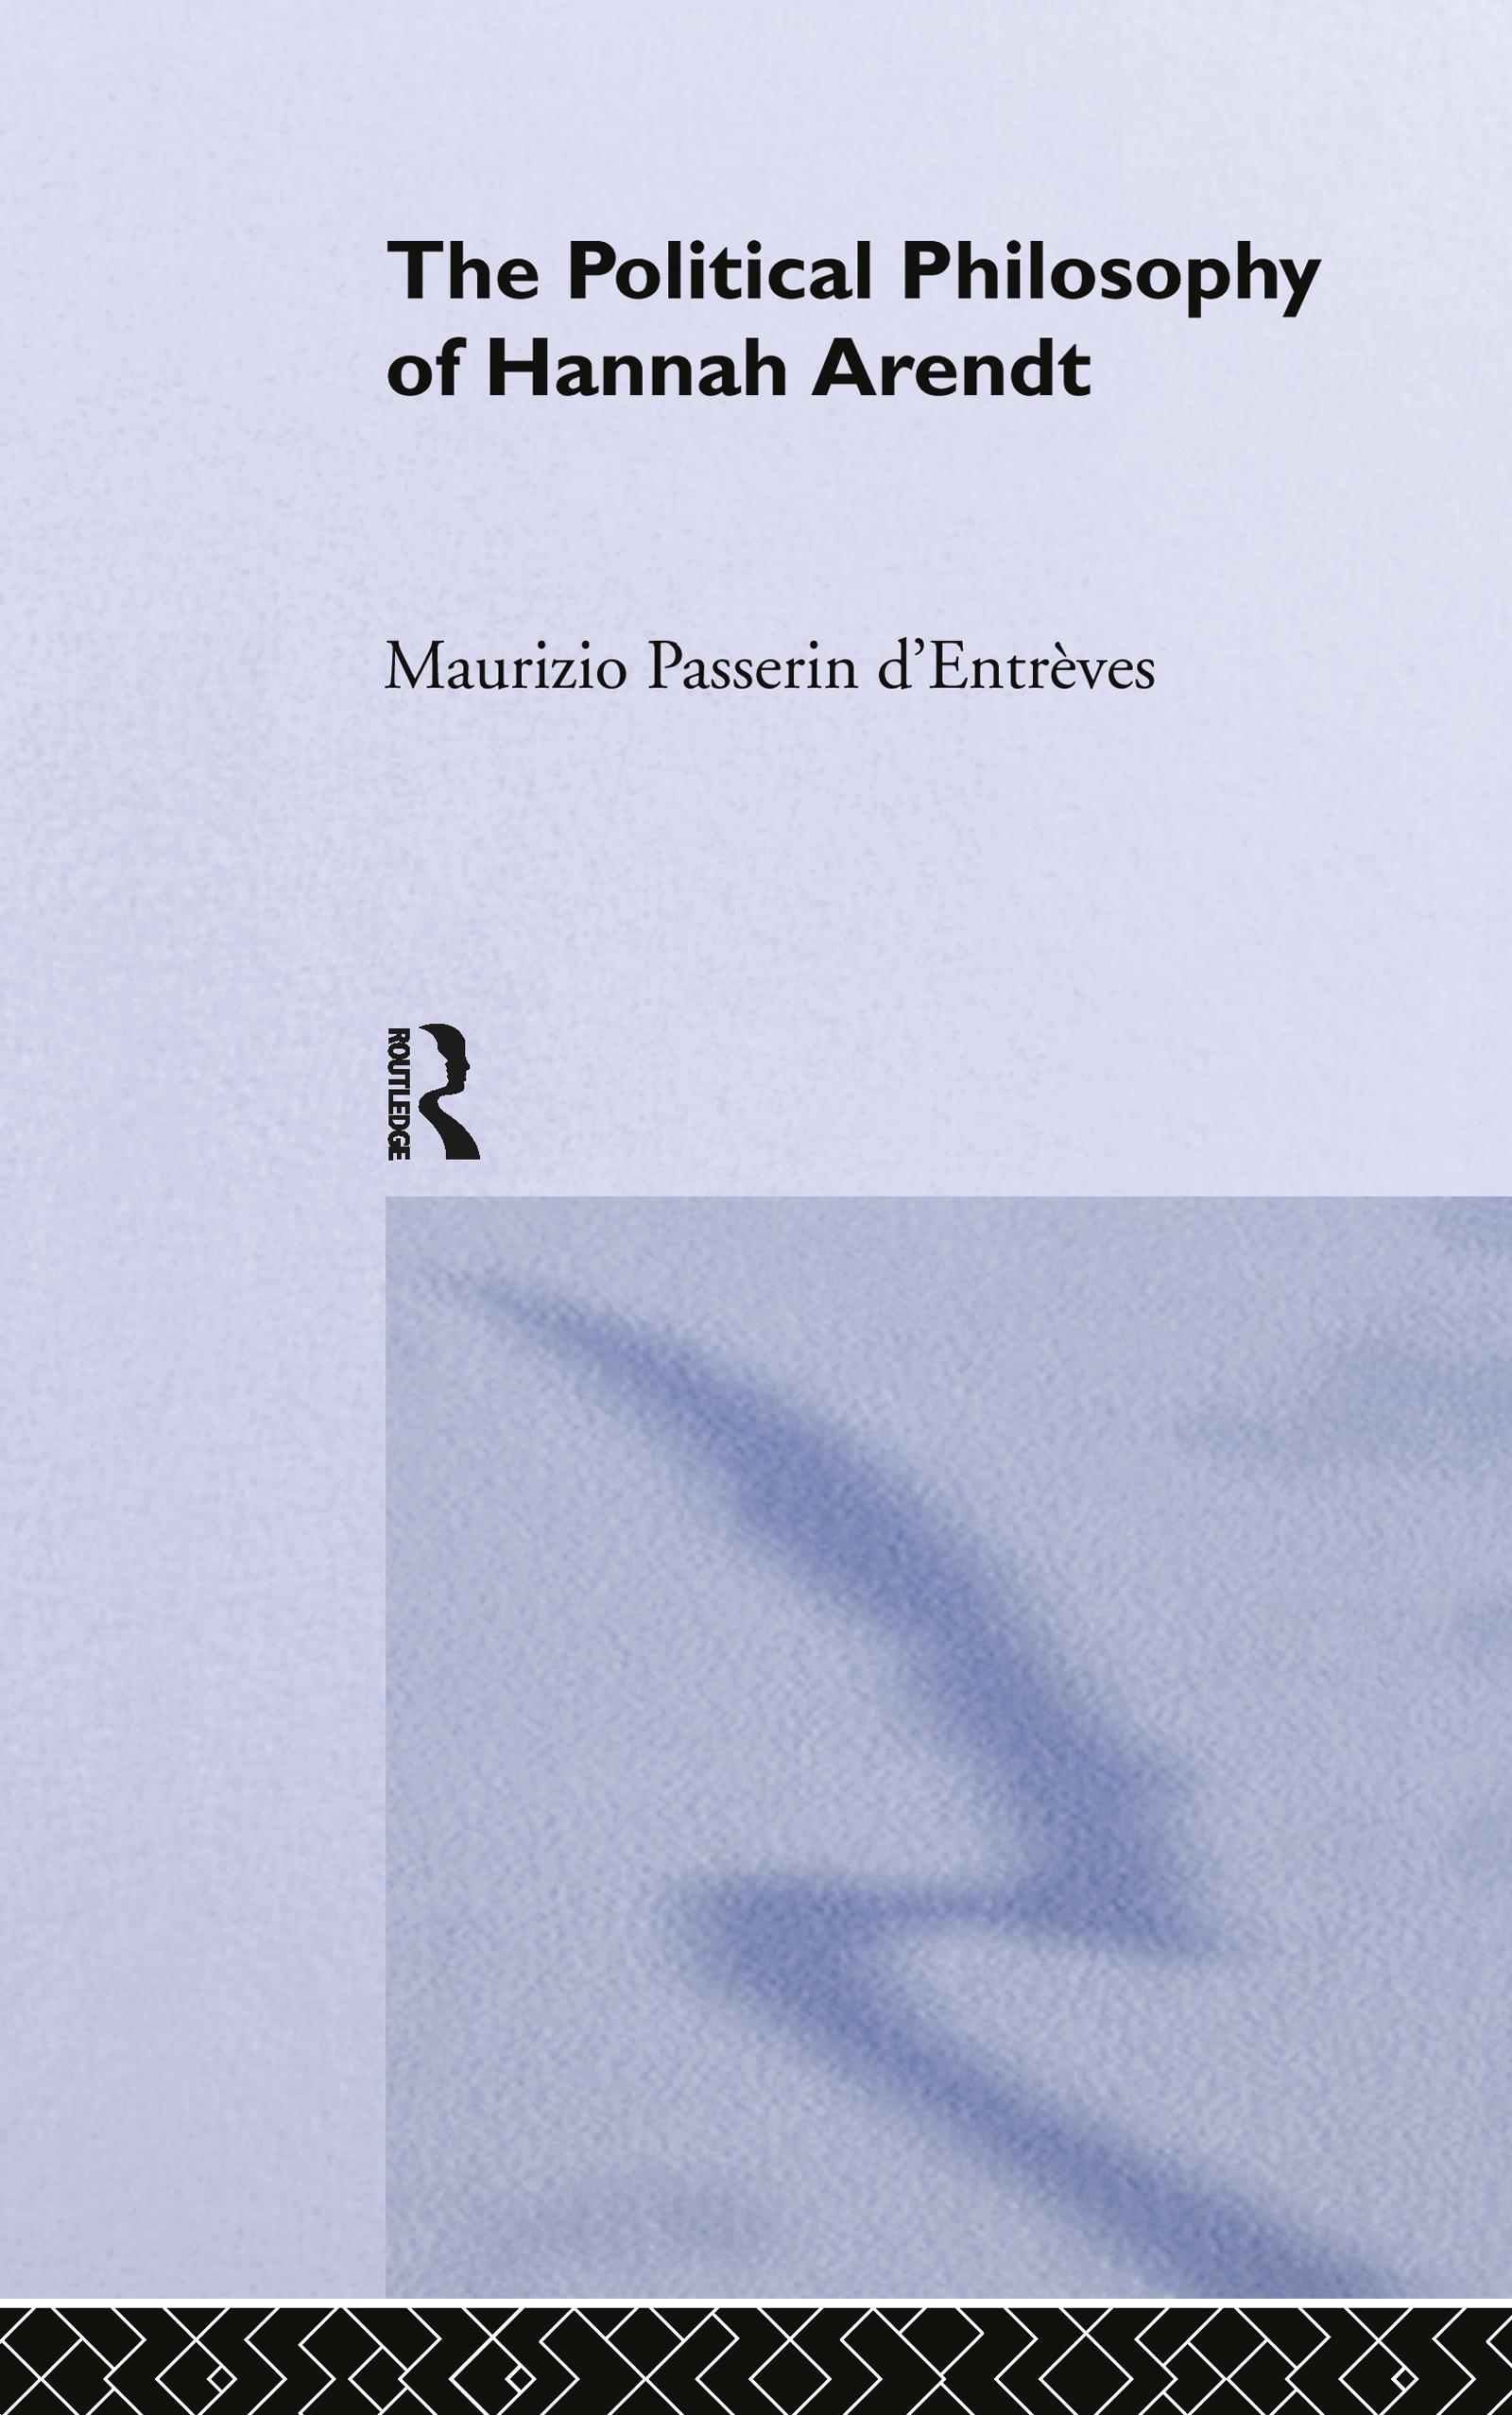 d\\ Entreves, M: The Political Philosophy of Hannah Arend - Maurizio Passerin d'Entrèves